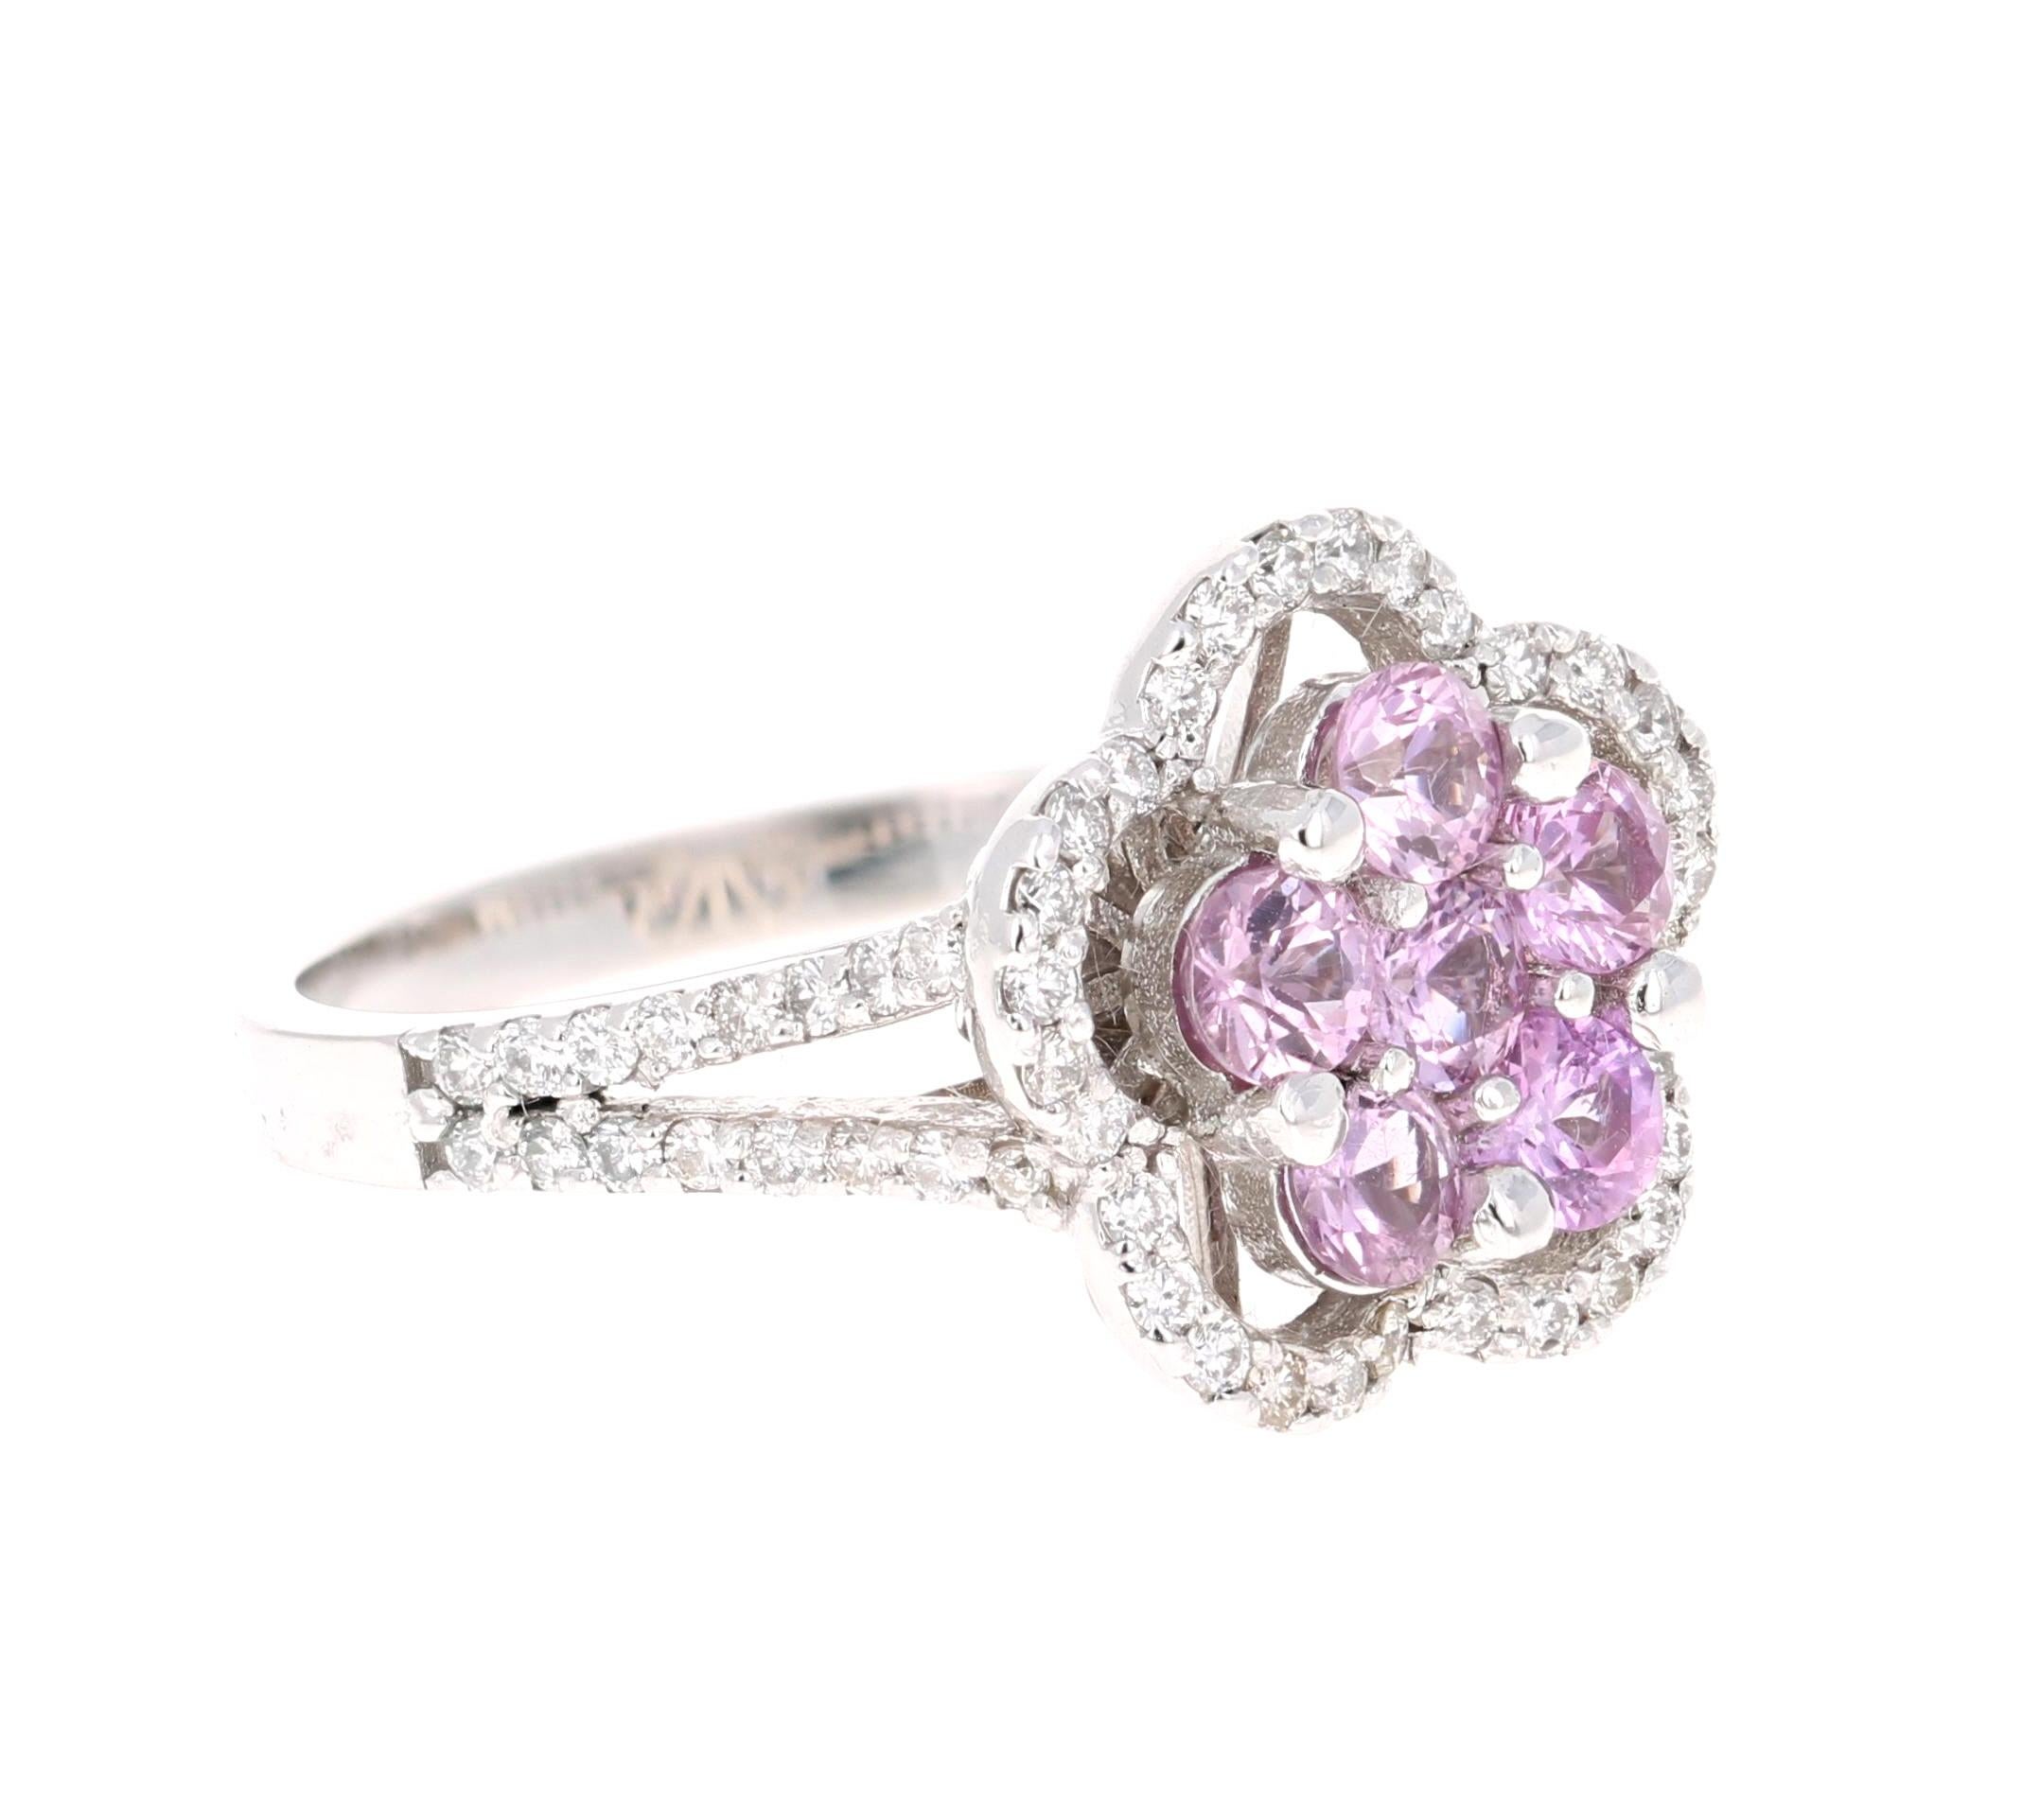 Cute Pink Sapphire and Diamond Ring! Can be an everyday ring or a unique Promise Ring!

This beautiful ring has 6 Round Cut Pink Sapphires that weigh 1.06 Carats as well as 62 Round Cut Diamonds that weigh 0.45 Carats. The total carat weight of the